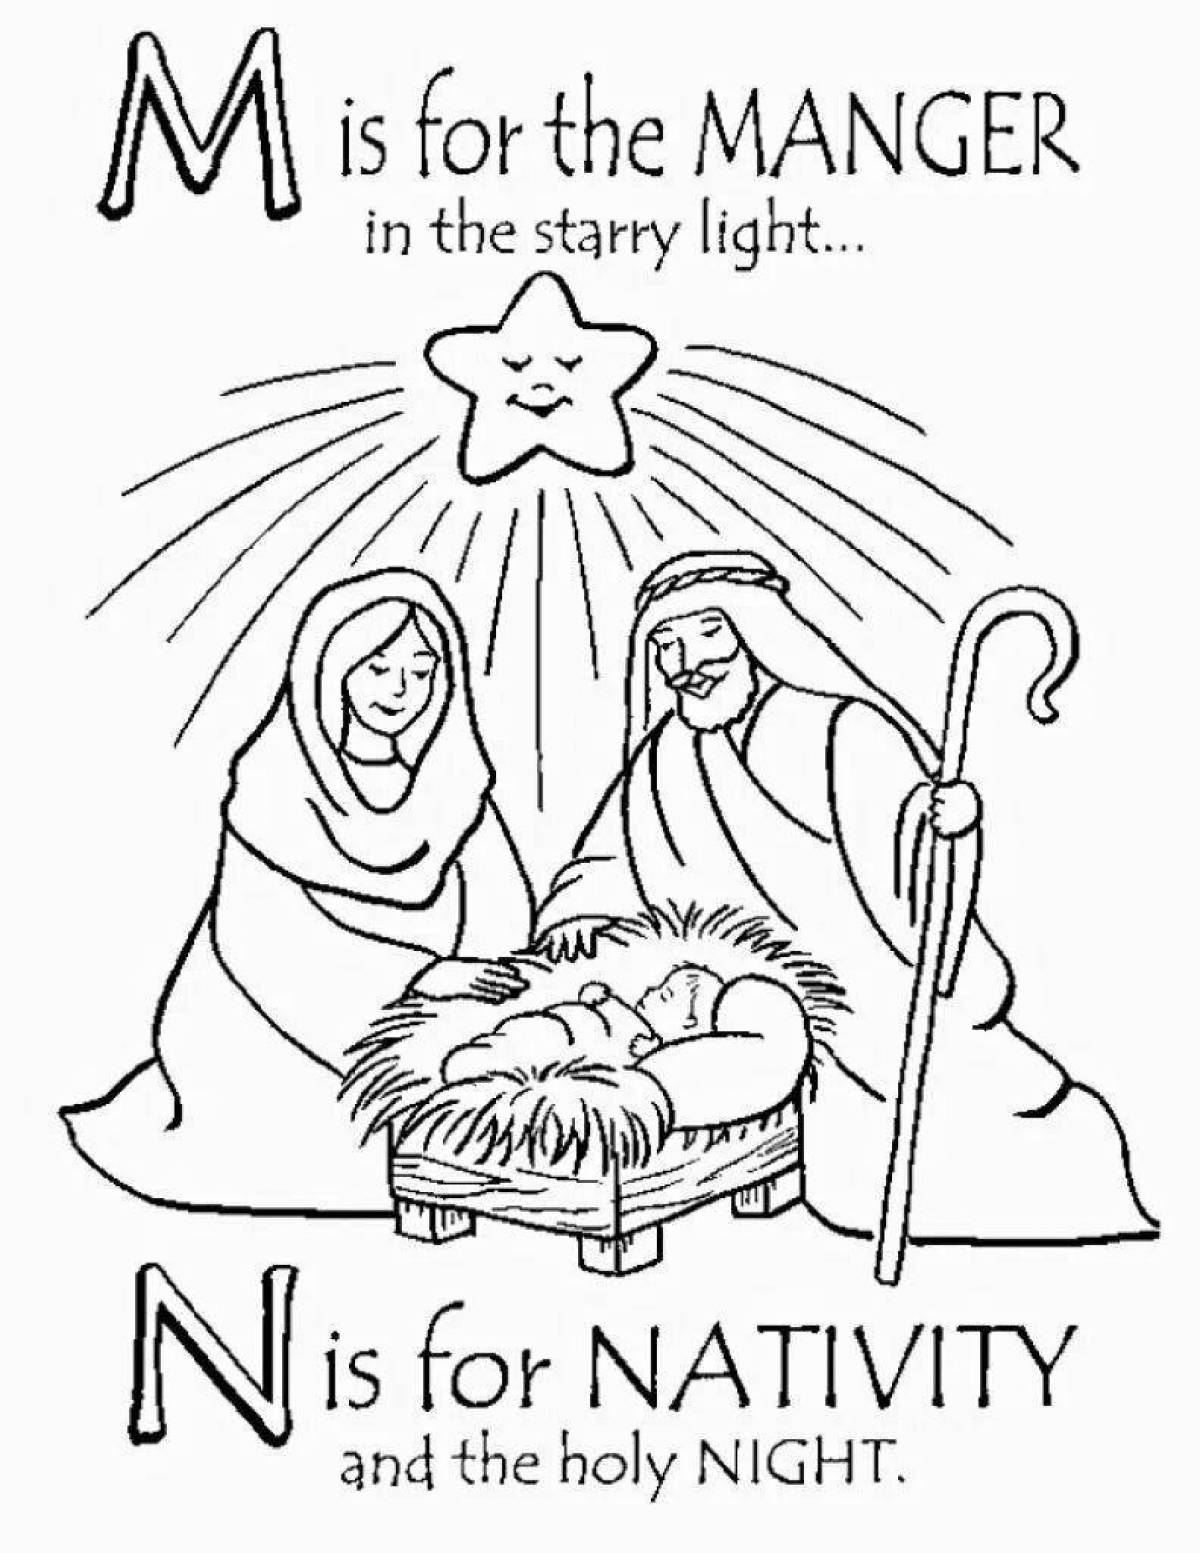 Funny christmas coloring book for kids